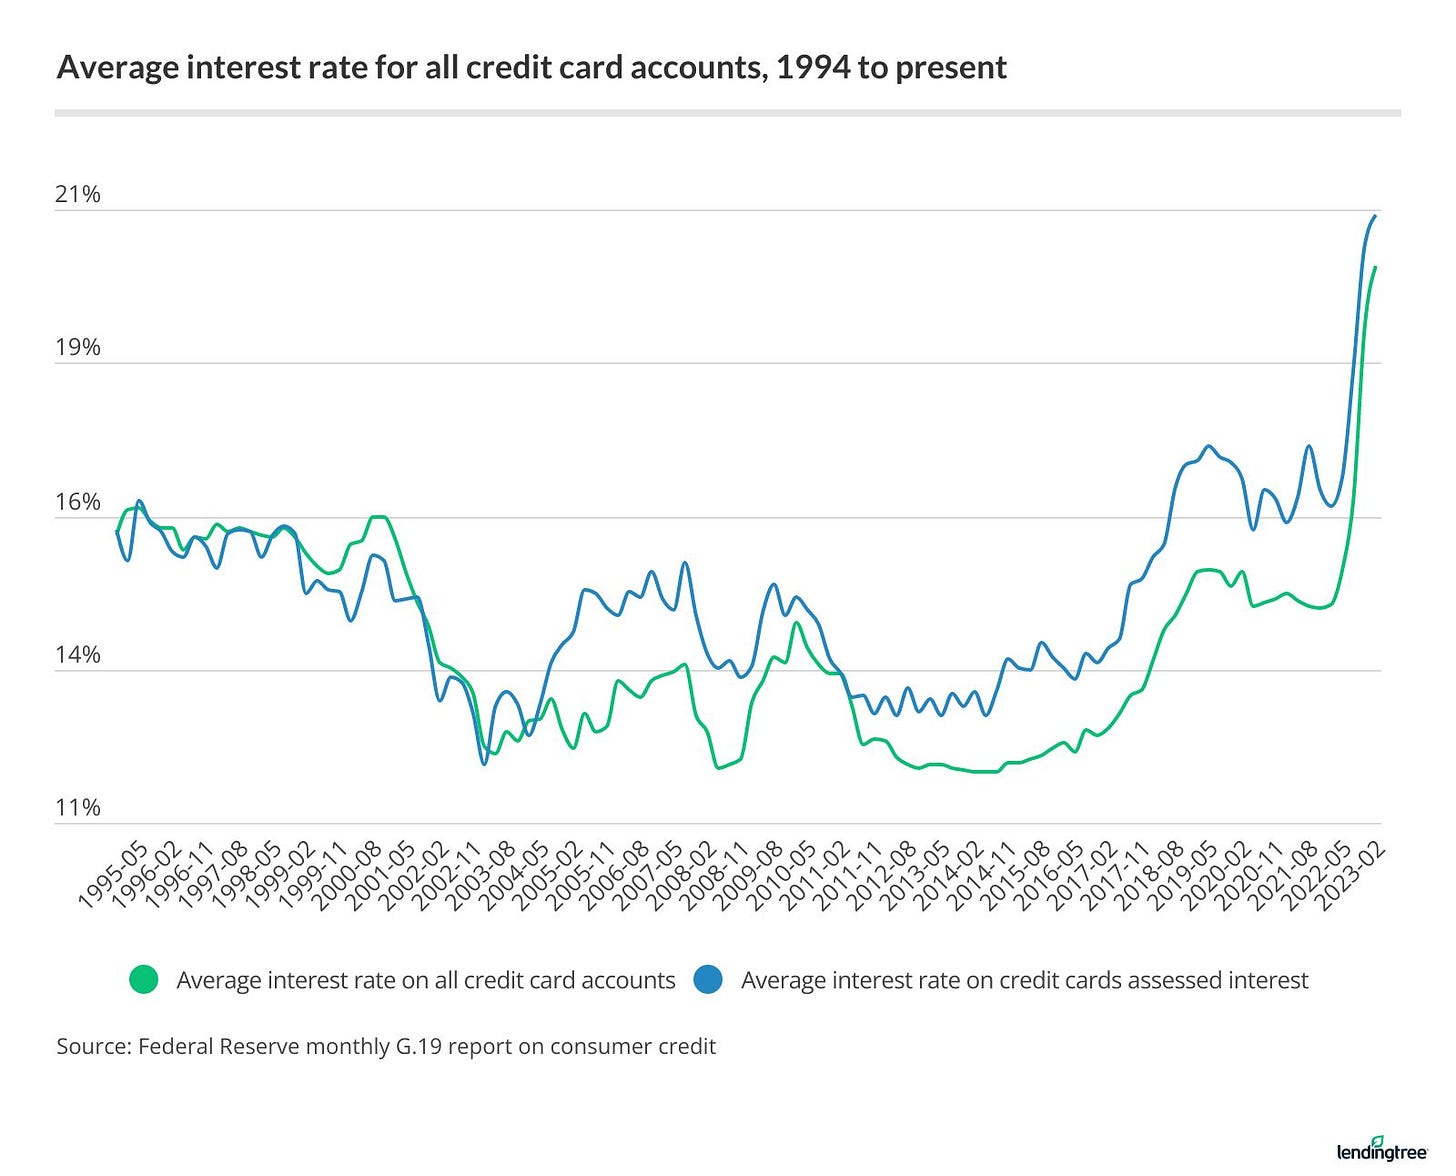 Average Credit Card Interest Rate in America Today